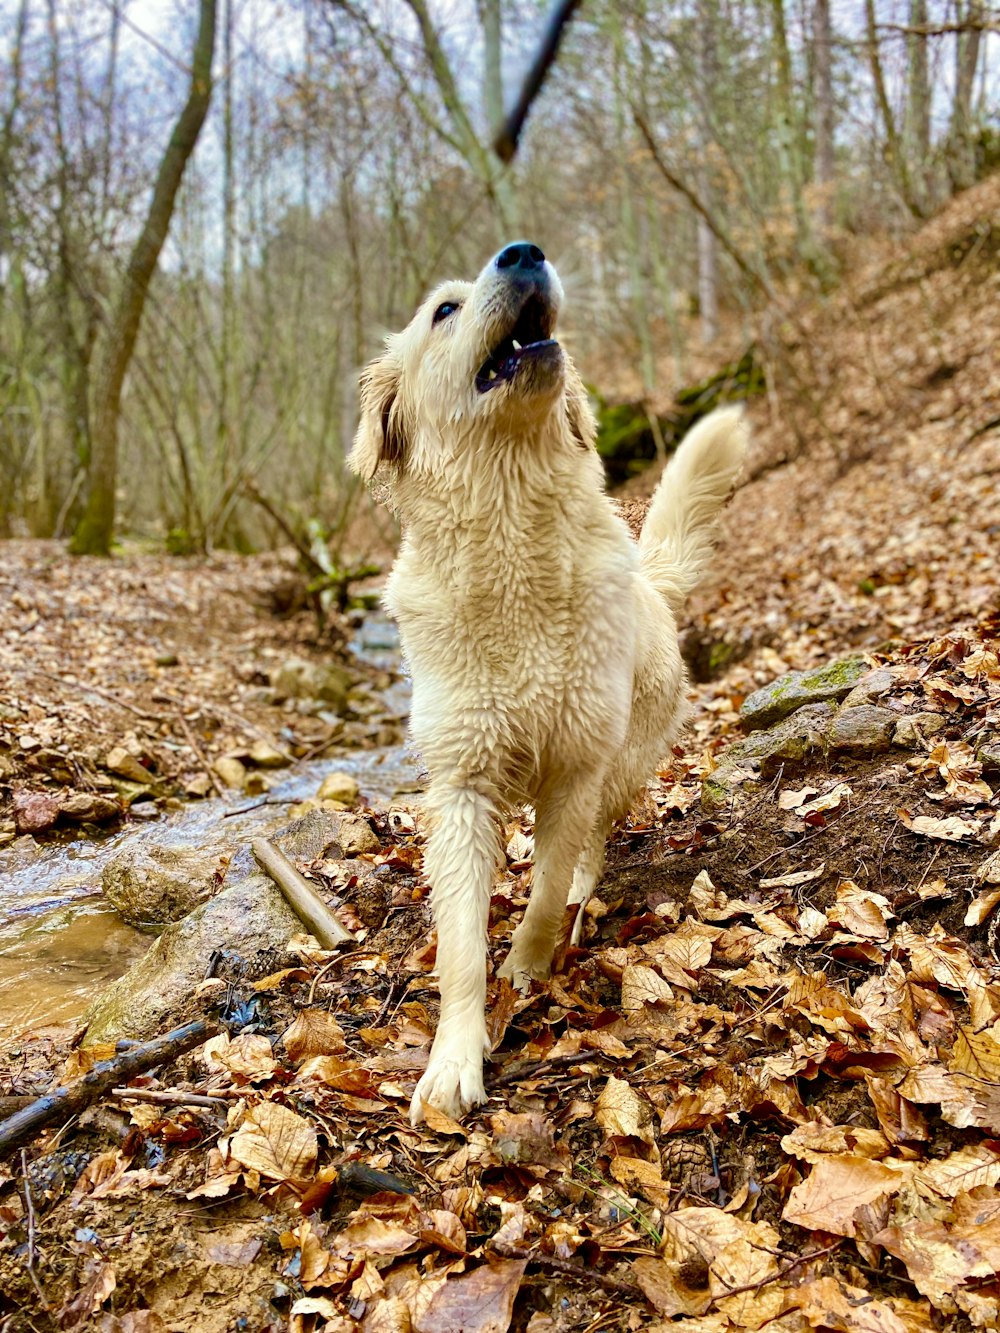 golden retriever walking on dried leaves during daytime